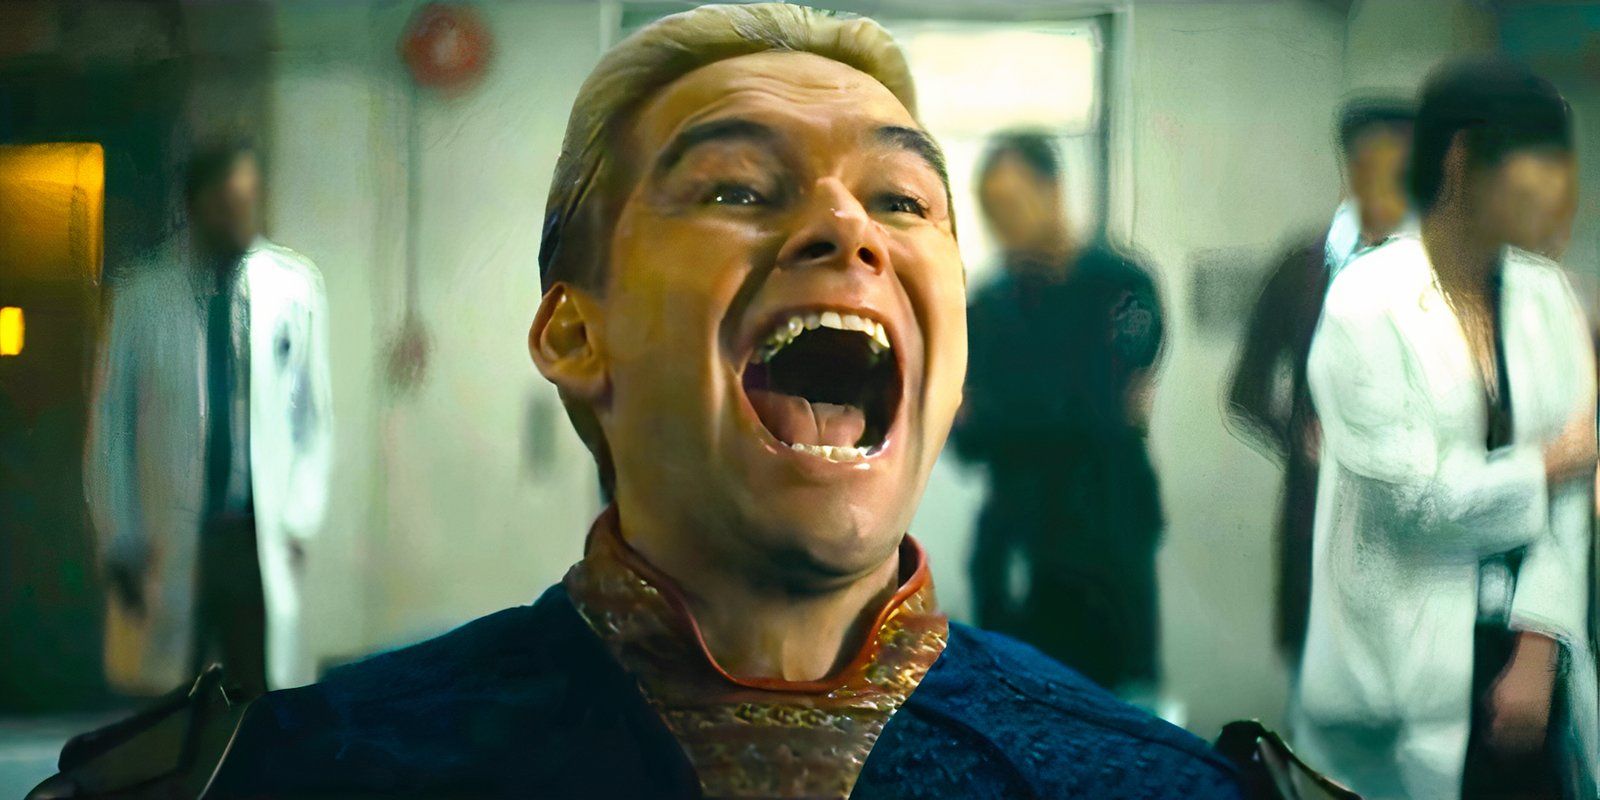 Homelander laughing with his mouth wide open in The Boys season 4 episode 4.